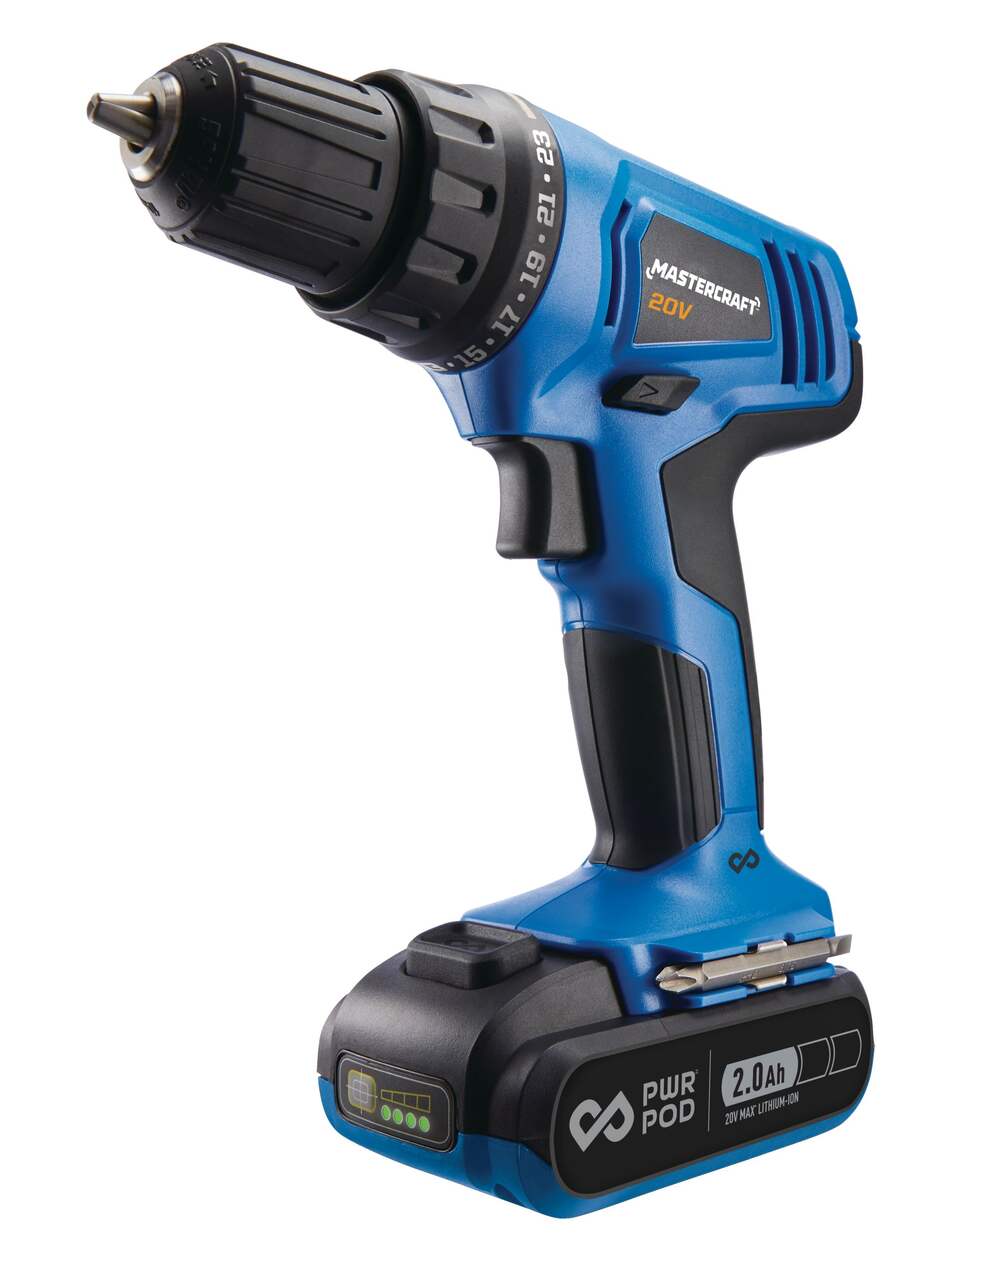 https://media-www.canadiantire.ca/product/fixing/tools/portable-power-tools/0541332/mastercraft-20v-1-speed-drill-36e81788-a27b-4349-ab2b-4c0121b5522d-jpgrendition.jpg?imdensity=1&imwidth=1244&impolicy=mZoom